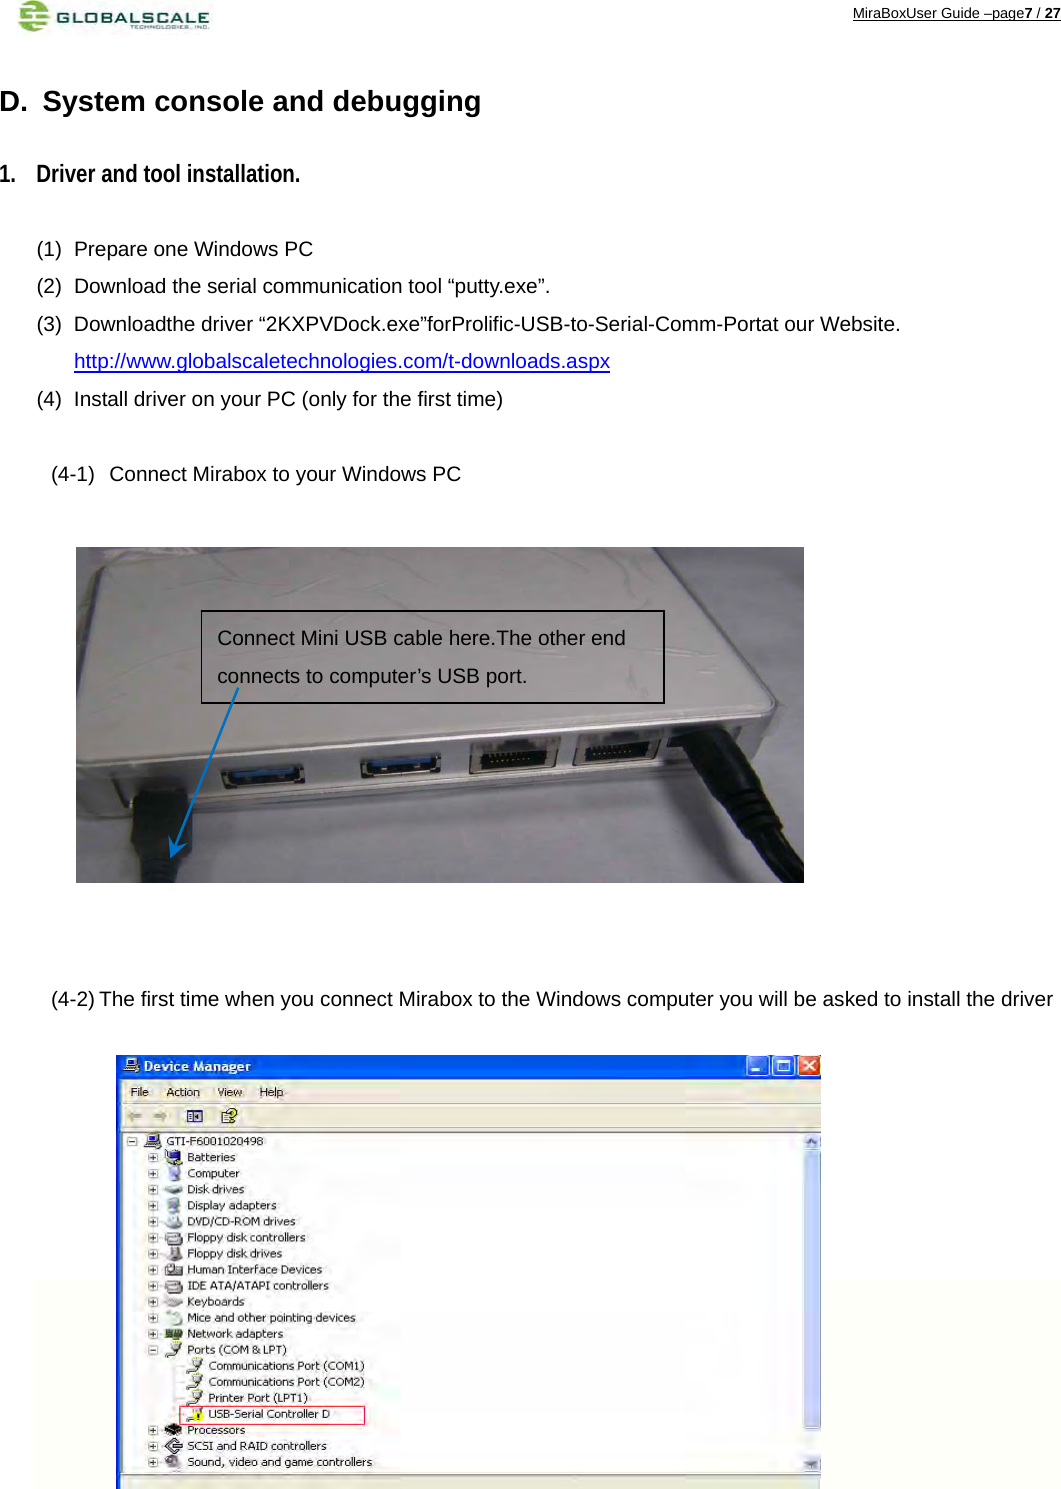 MiraBoxUser Guide –page7 / 27  D.  System console and debugging 1. Driver and tool installation. (1)  Prepare one Windows PC (2)  Download the serial communication tool “putty.exe”. (3) Downloadthe driver “2KXPVDock.exe”forProlific-USB-to-Serial-Comm-Portat our Website. http://www.globalscaletechnologies.com/t-downloads.aspx (4)  Install driver on your PC (only for the first time)  (4-1)   Connect Mirabox to your Windows PC              (4-2) The first time when you connect Mirabox to the Windows computer you will be asked to install the driver              Connect Mini USB cable here.The other end connects to computer’s USB port. 